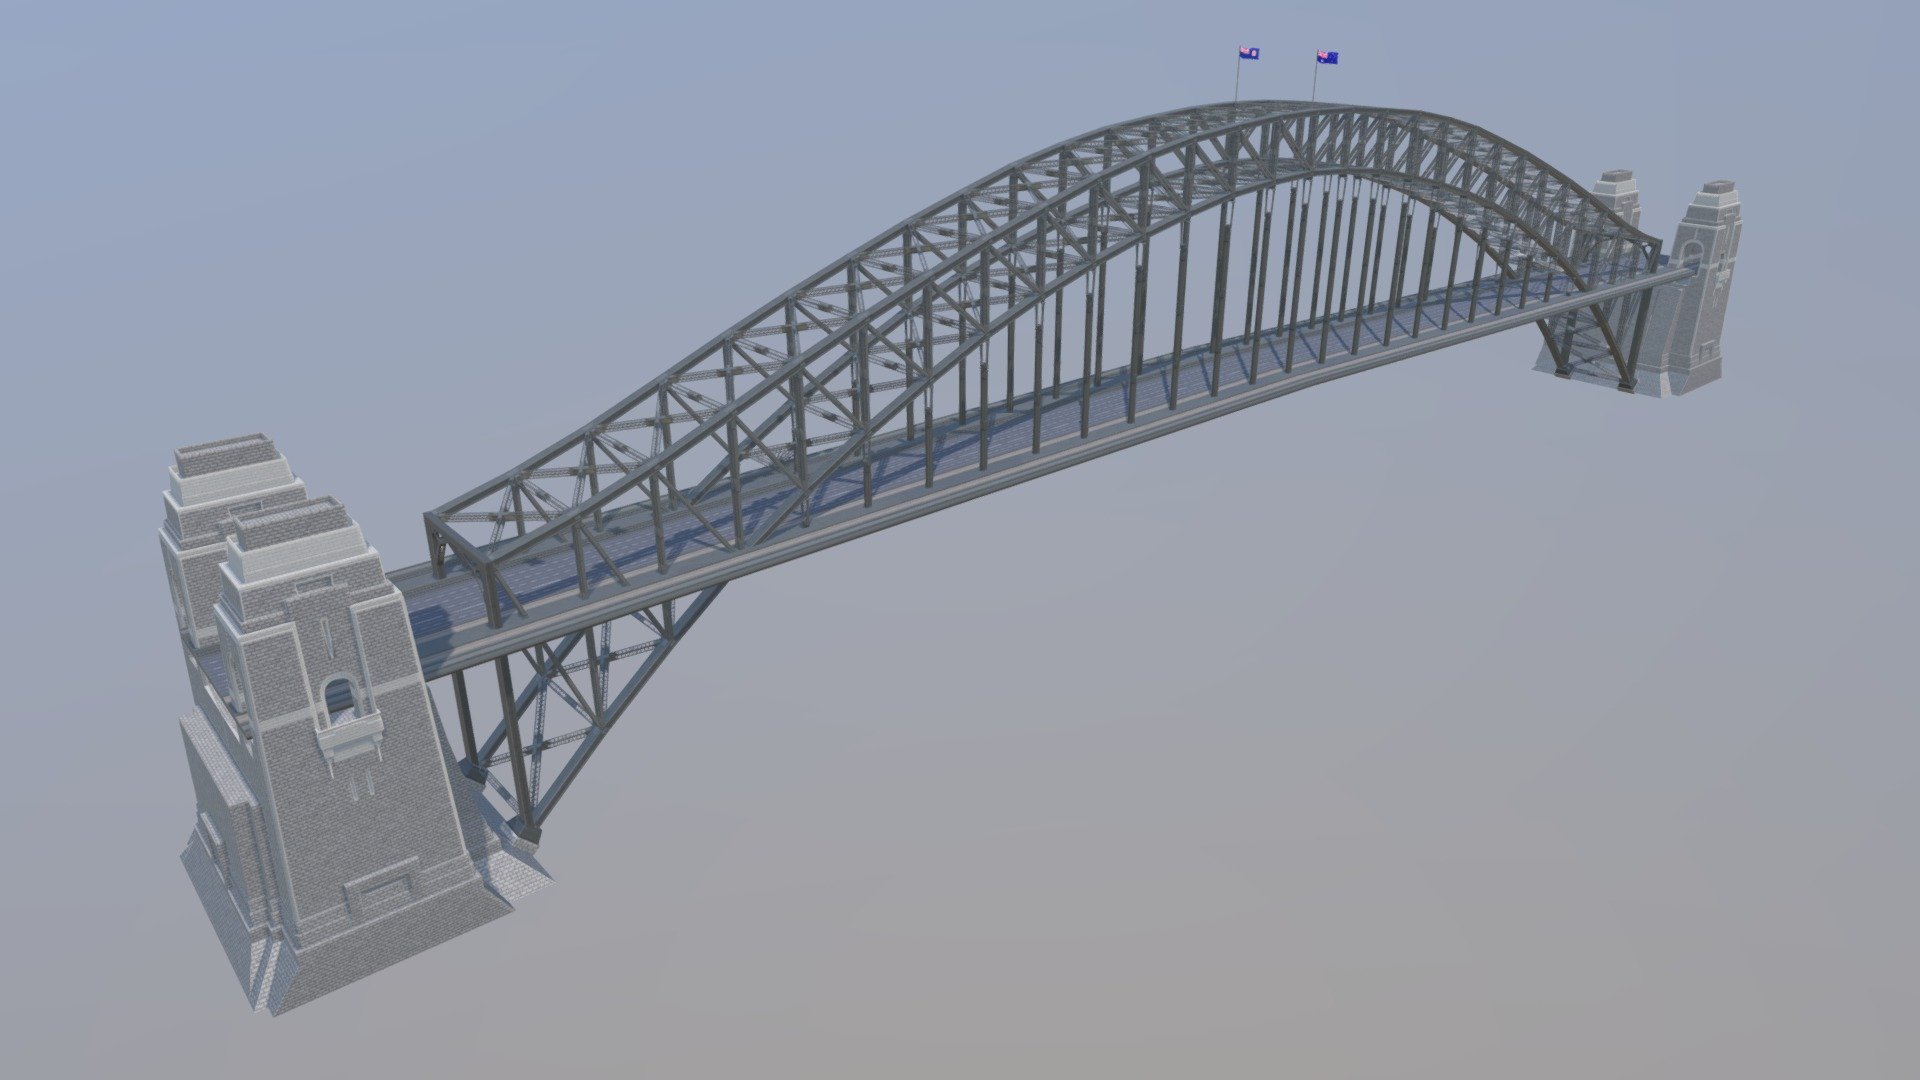 Replica of Sydney Harbour Bridge, developed as part of the Austech Connect team, for Bridgeclimb Sydney's mobile AR showcase in May of 2021 - Past Folio: Sydney Harbour Bridge, c. May 2021 - 3D model by HazelnutAUS 3d model